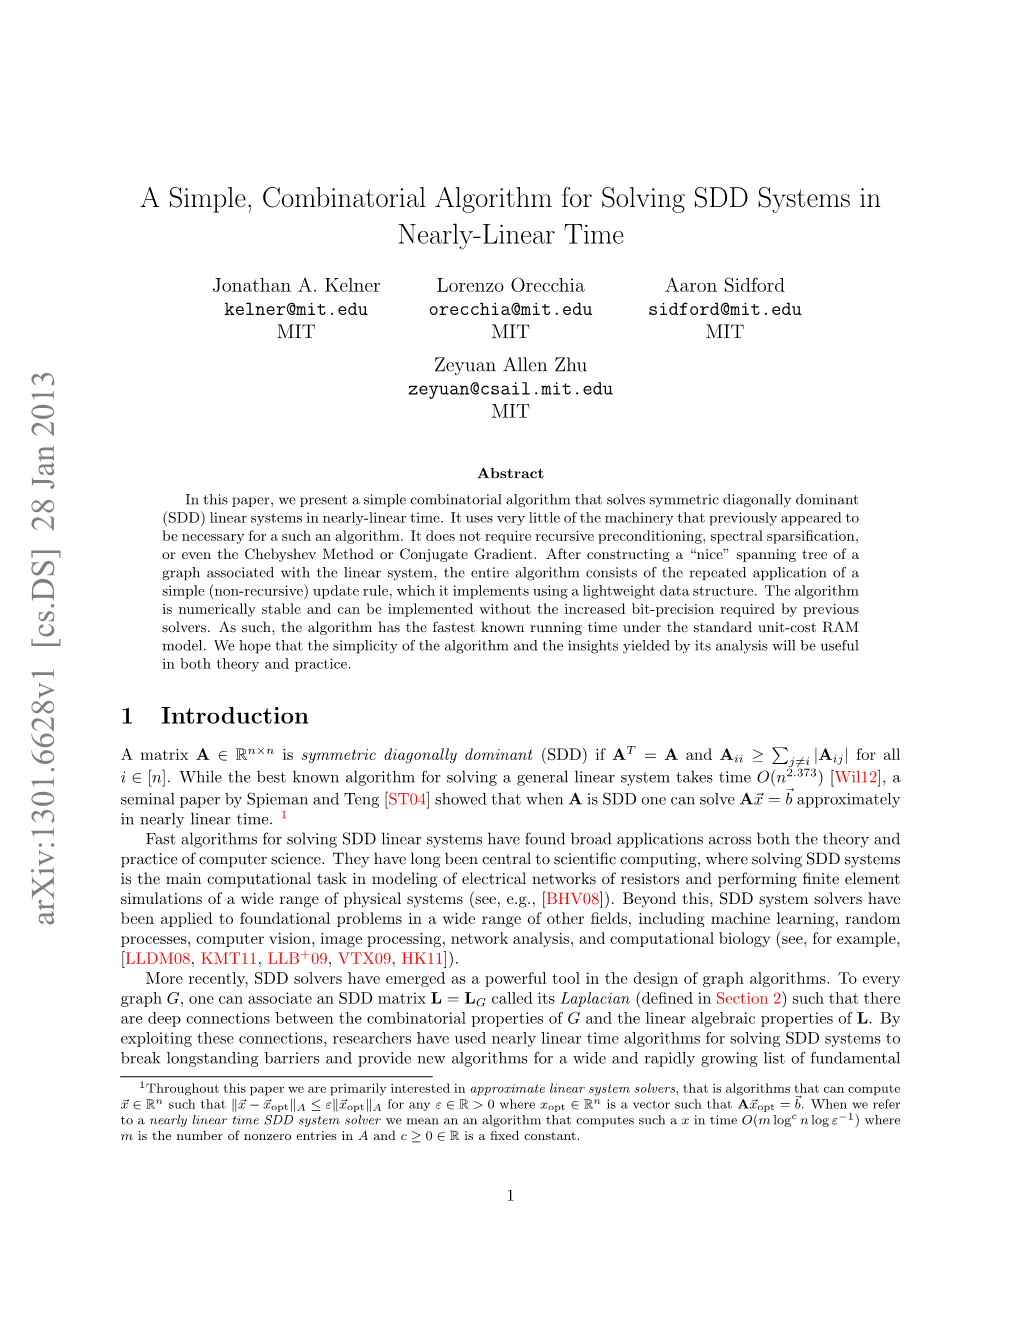 A Simple, Combinatorial Algorithm for Solving SDD Systems in Nearly-Linear Time